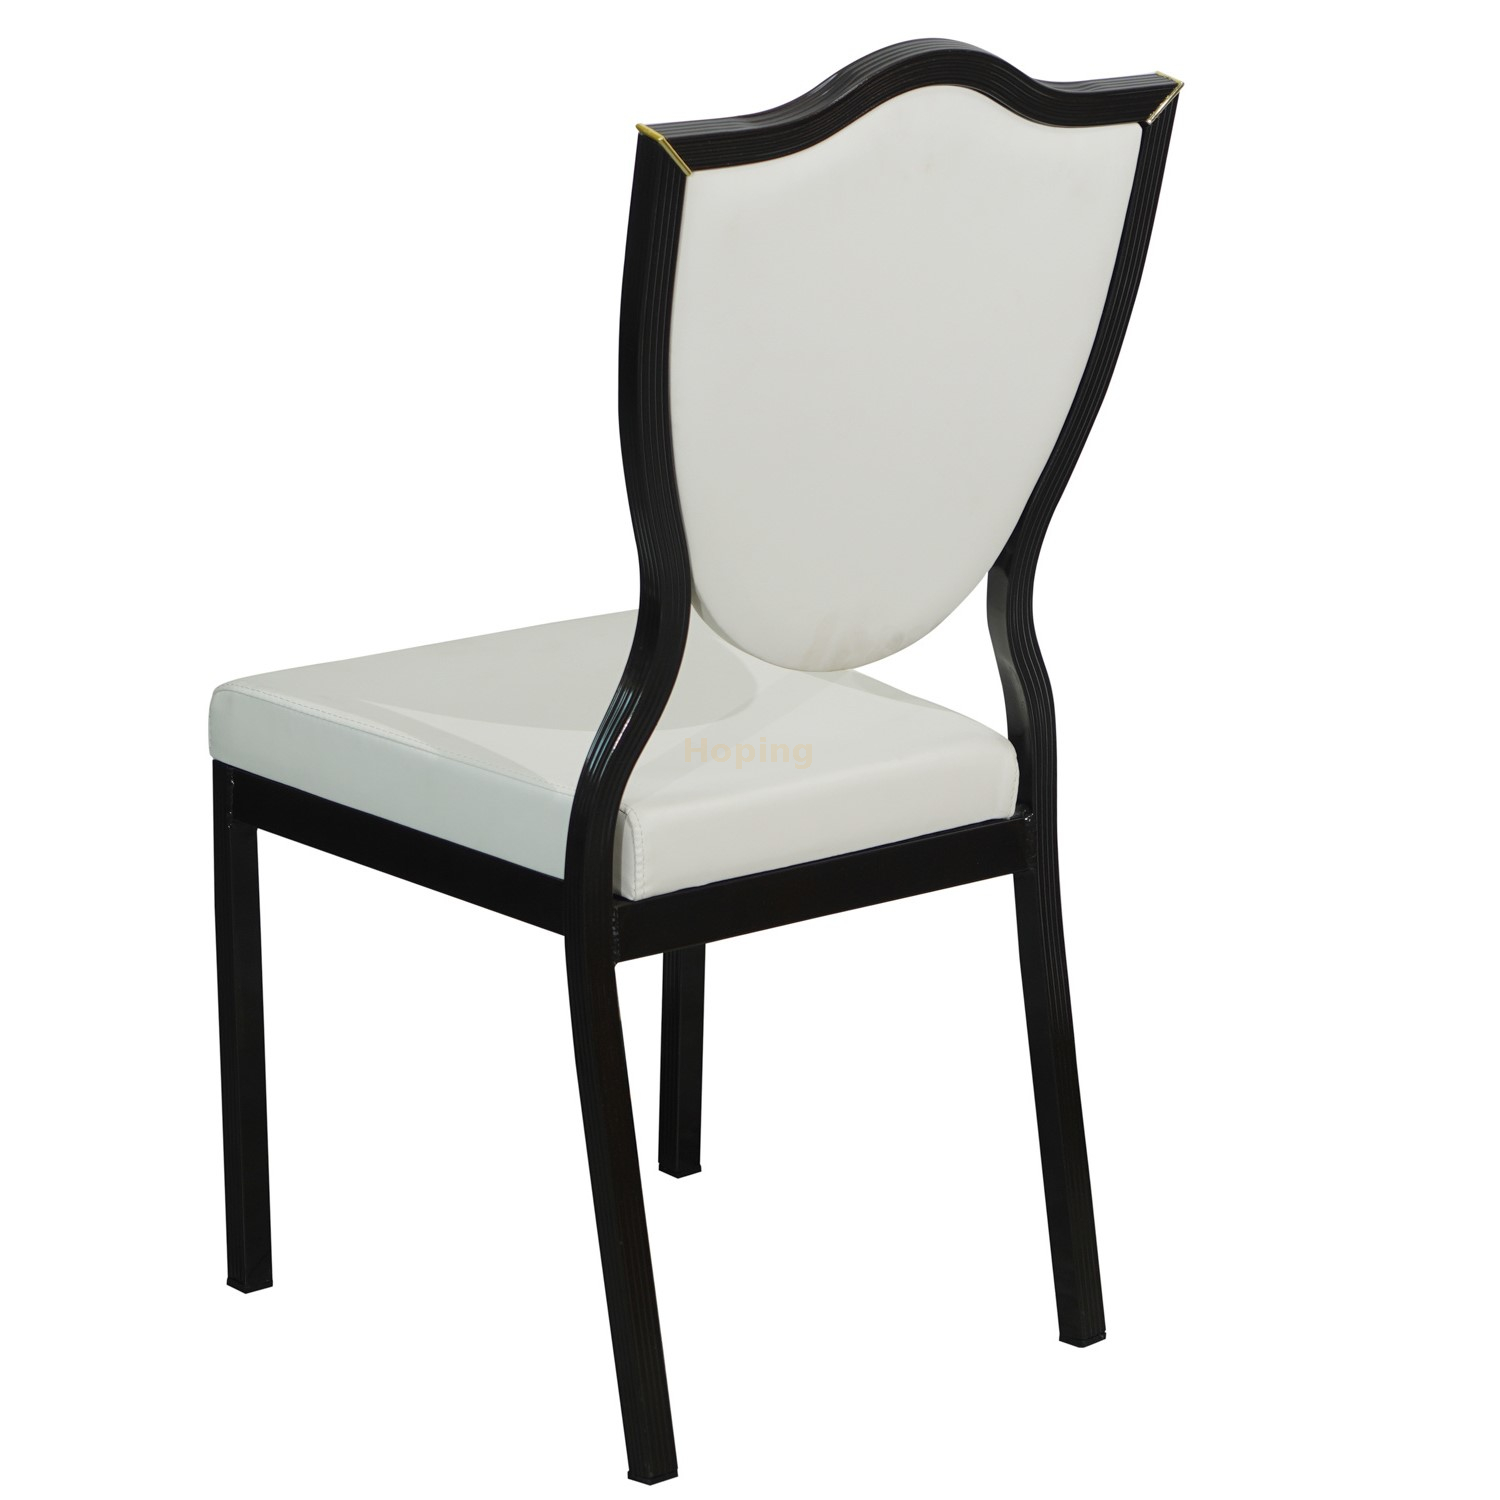 Black Frame and White PU Seat Banquet Chair for Banquet Wedding Feast Dining Chair